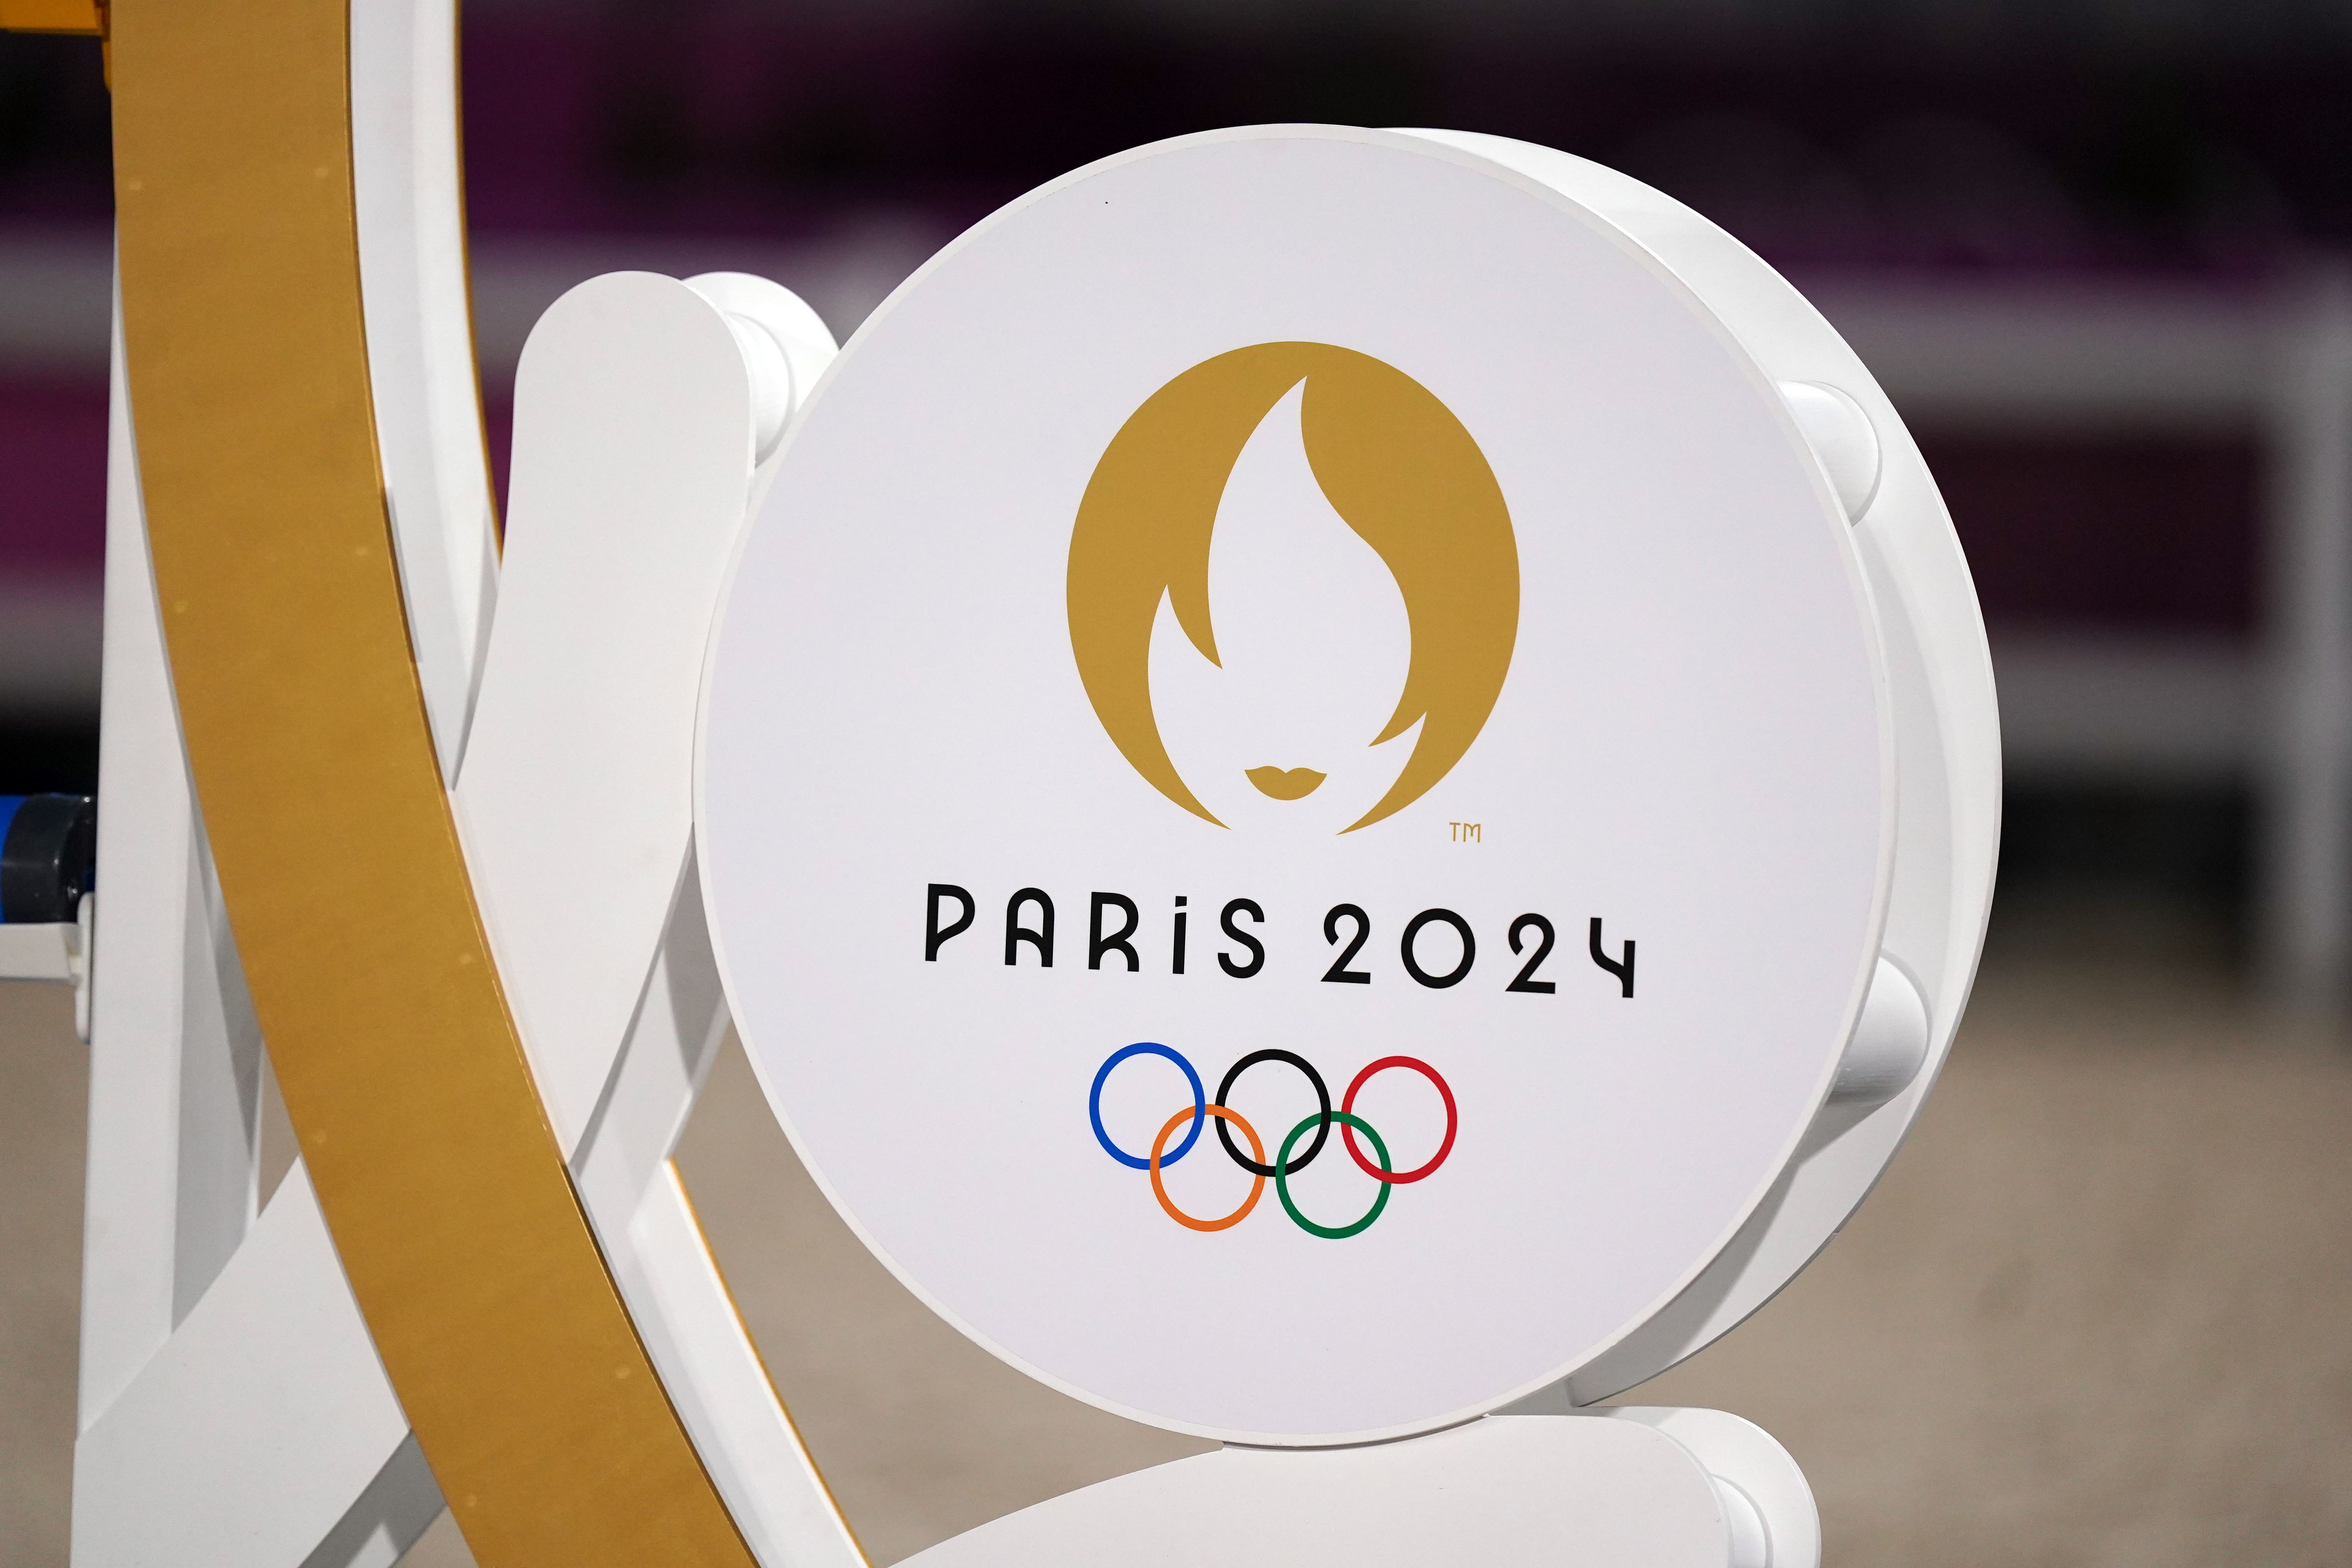 Russian and Belarusian athletes allowed to compete as neutrals at Paris